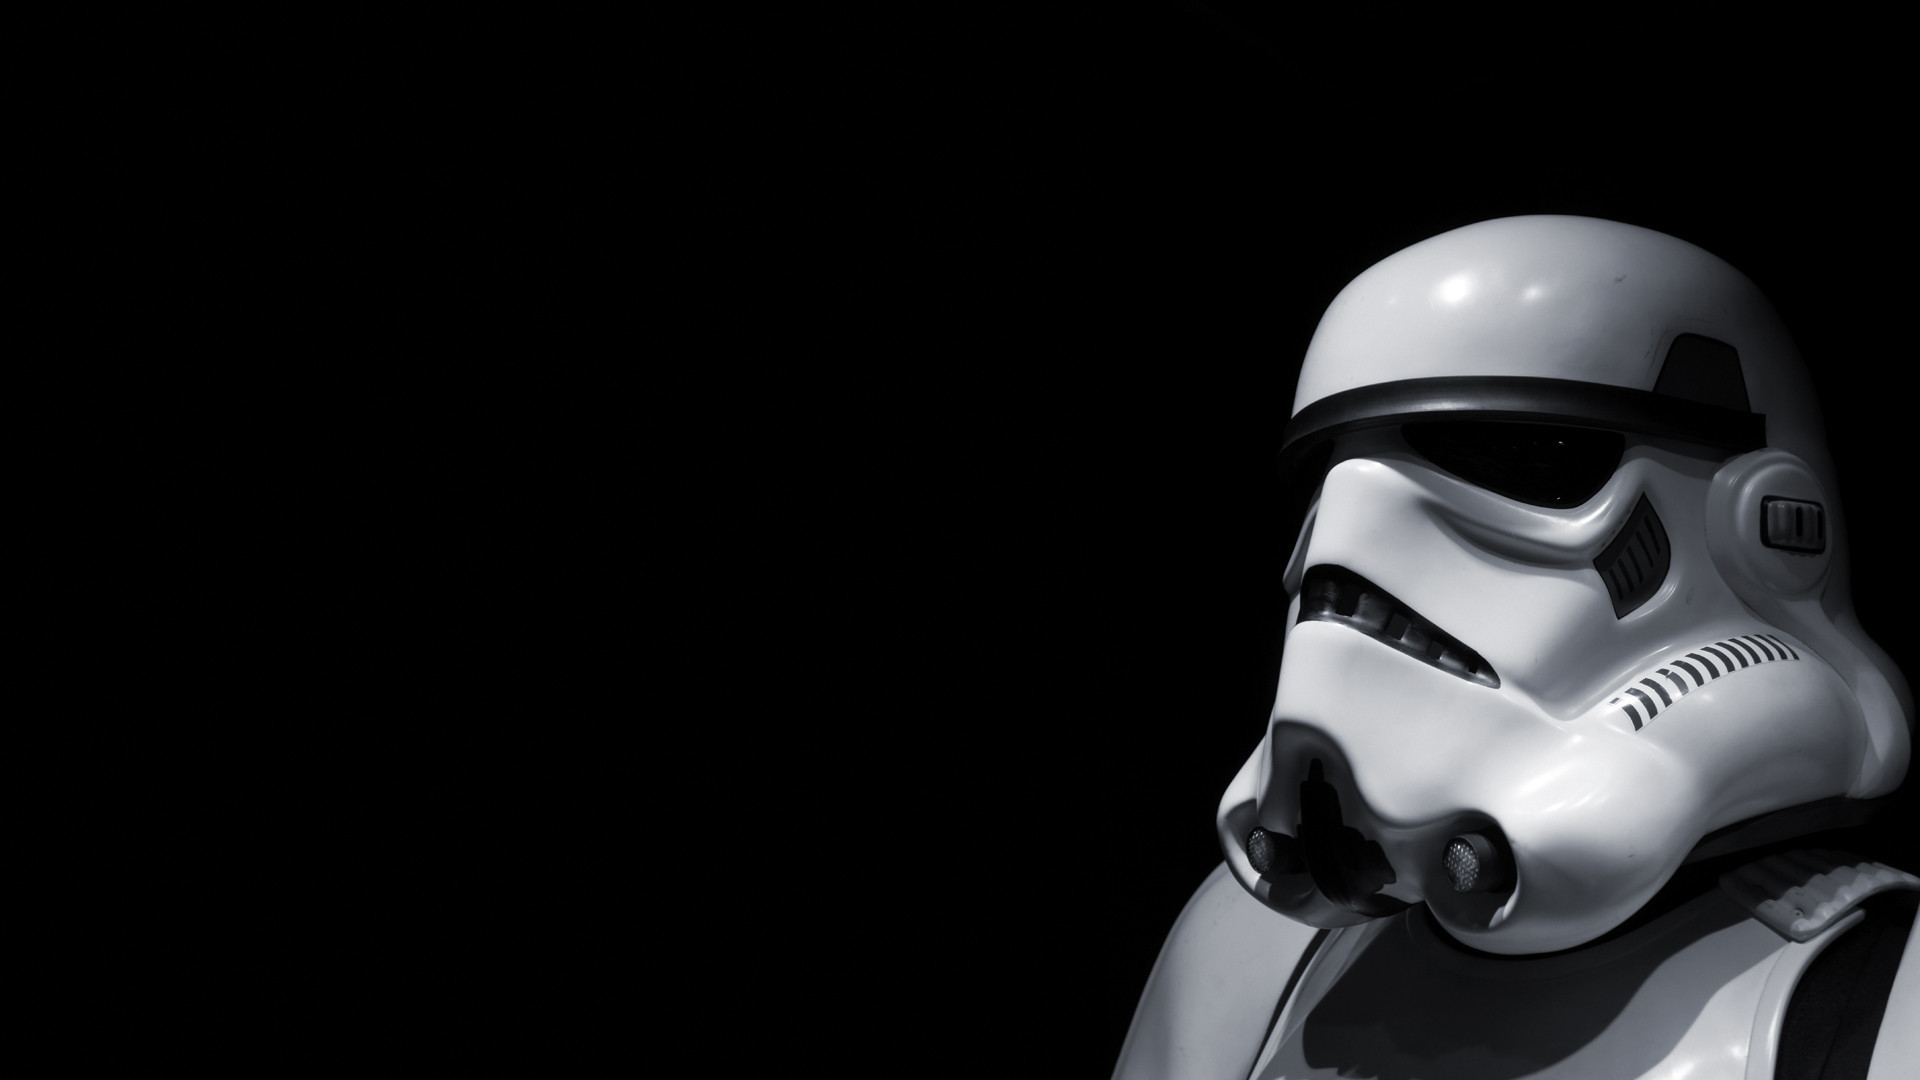 Stormtrooper 1920×1080 I shot this photo of the stormtrooper costume